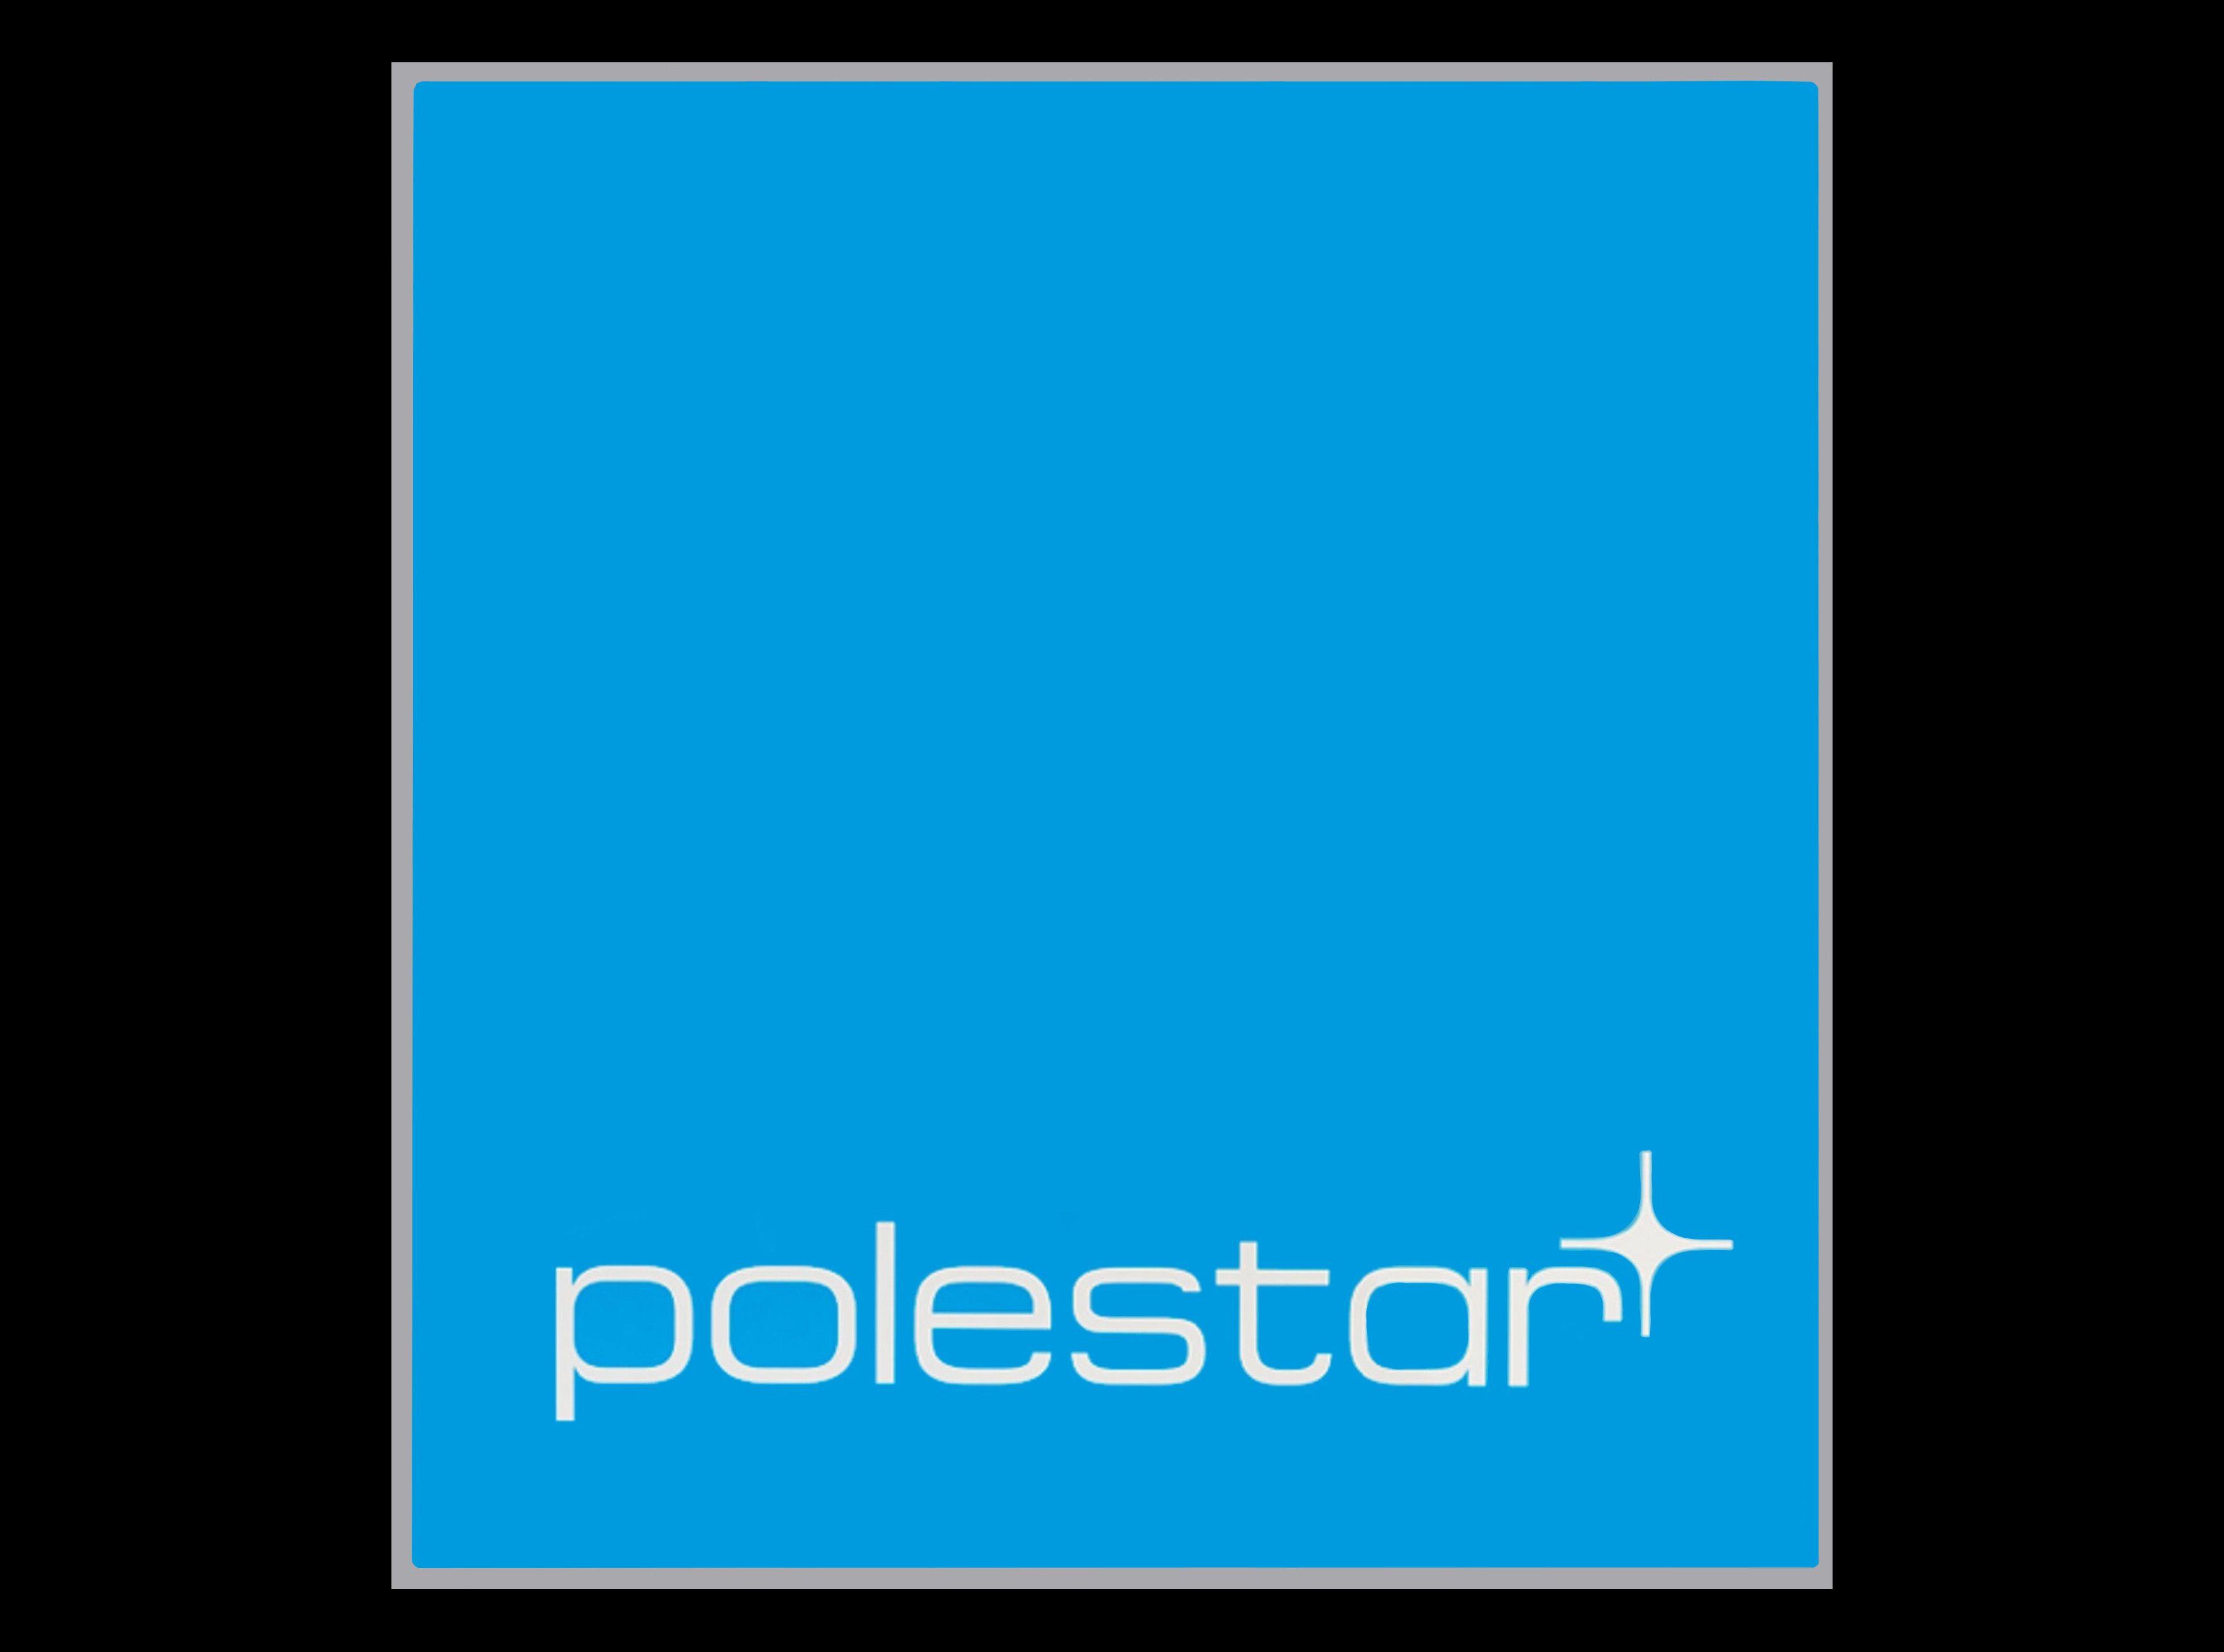 Lower Case Letters Blue and Silver Logo - Polestar Logo Meaning and History, latest models | World Cars Brands